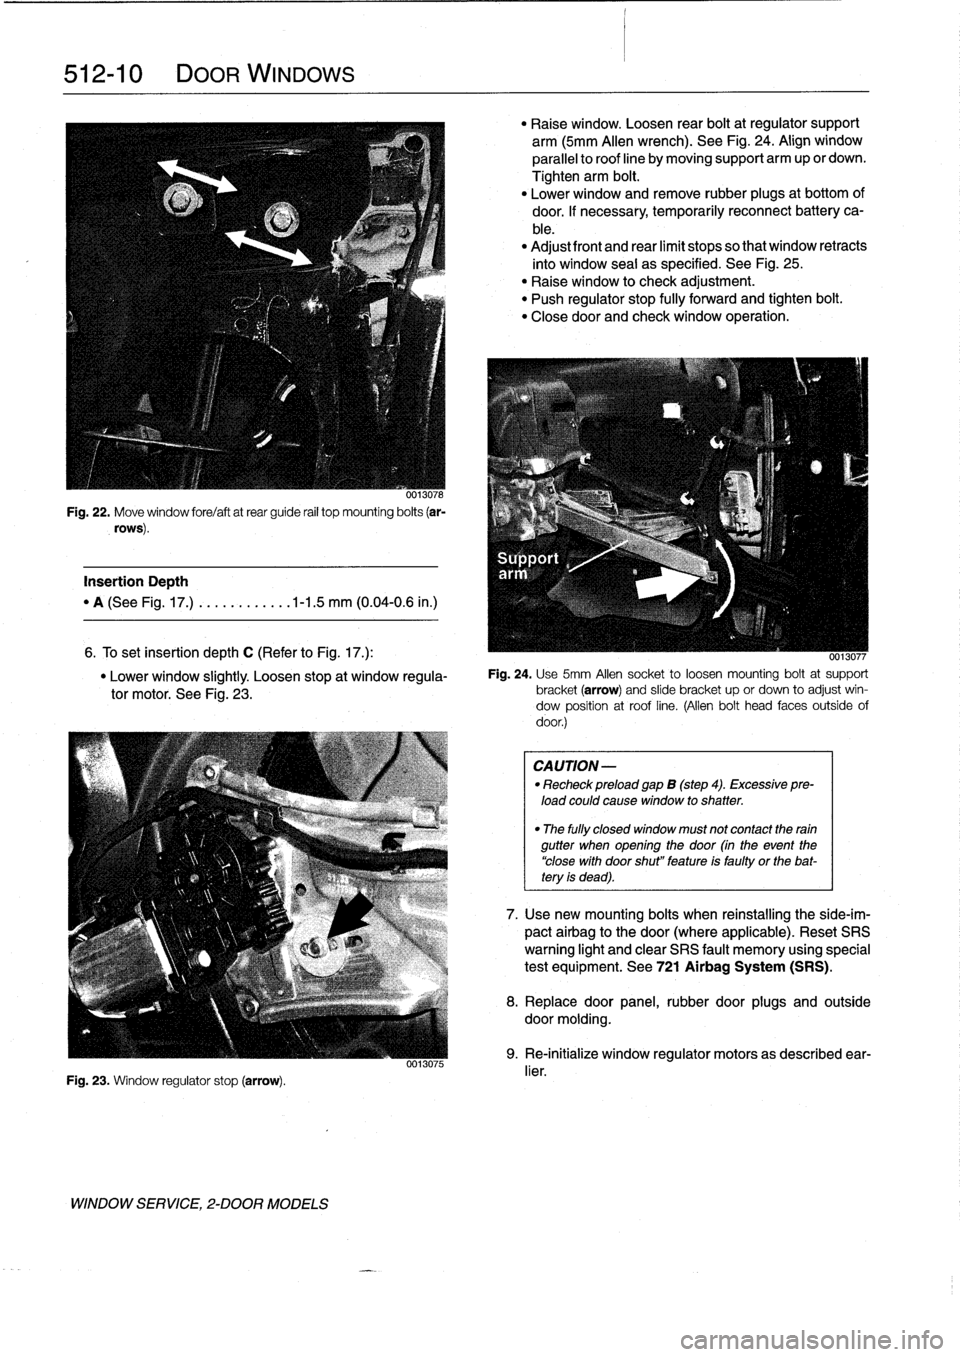 BMW 323i 1993 E36 Workshop Manual 
512-
1
0

	

DOOR
WINDOWS

0013078

Fig
.
22
.
Move
window
fore/aftatrear
guide
rail
top
mounting
bolts
(ar-

rows)
.

Insertion
Depth

"
A
(See
Fig
.
17
.)
.
..........
.1-1
.5
mm
(0
.04-0
.6
in
.)
